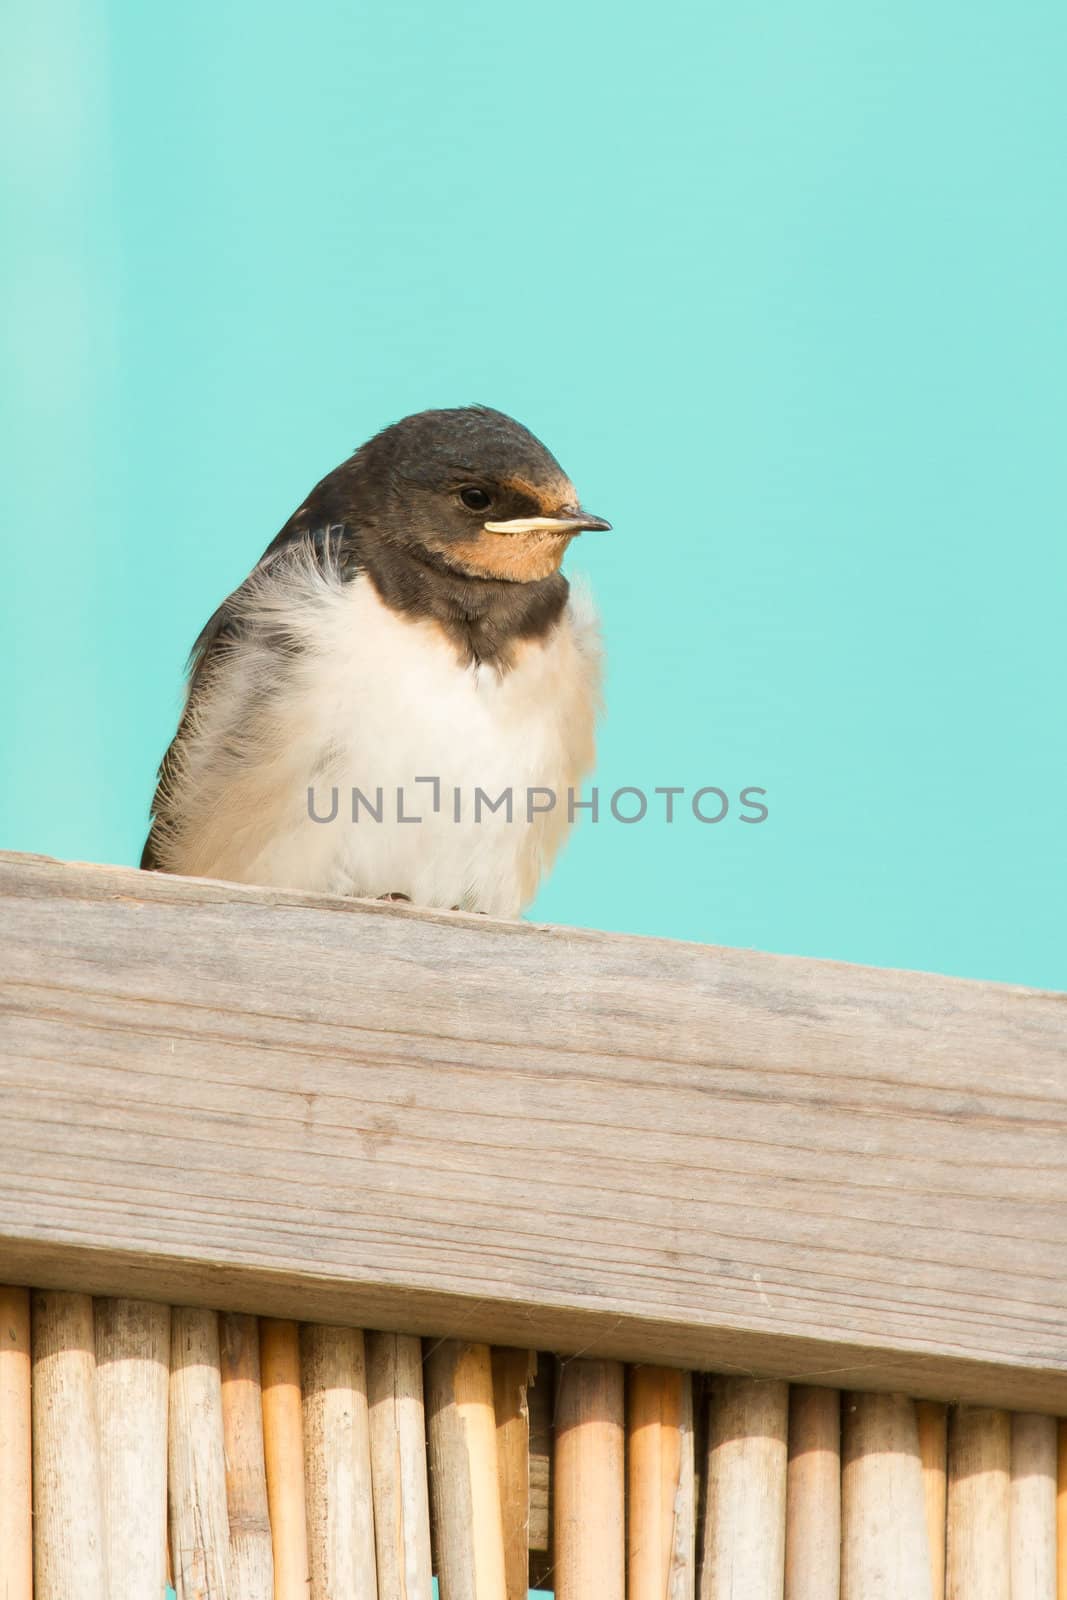 A young swallow by michaklootwijk